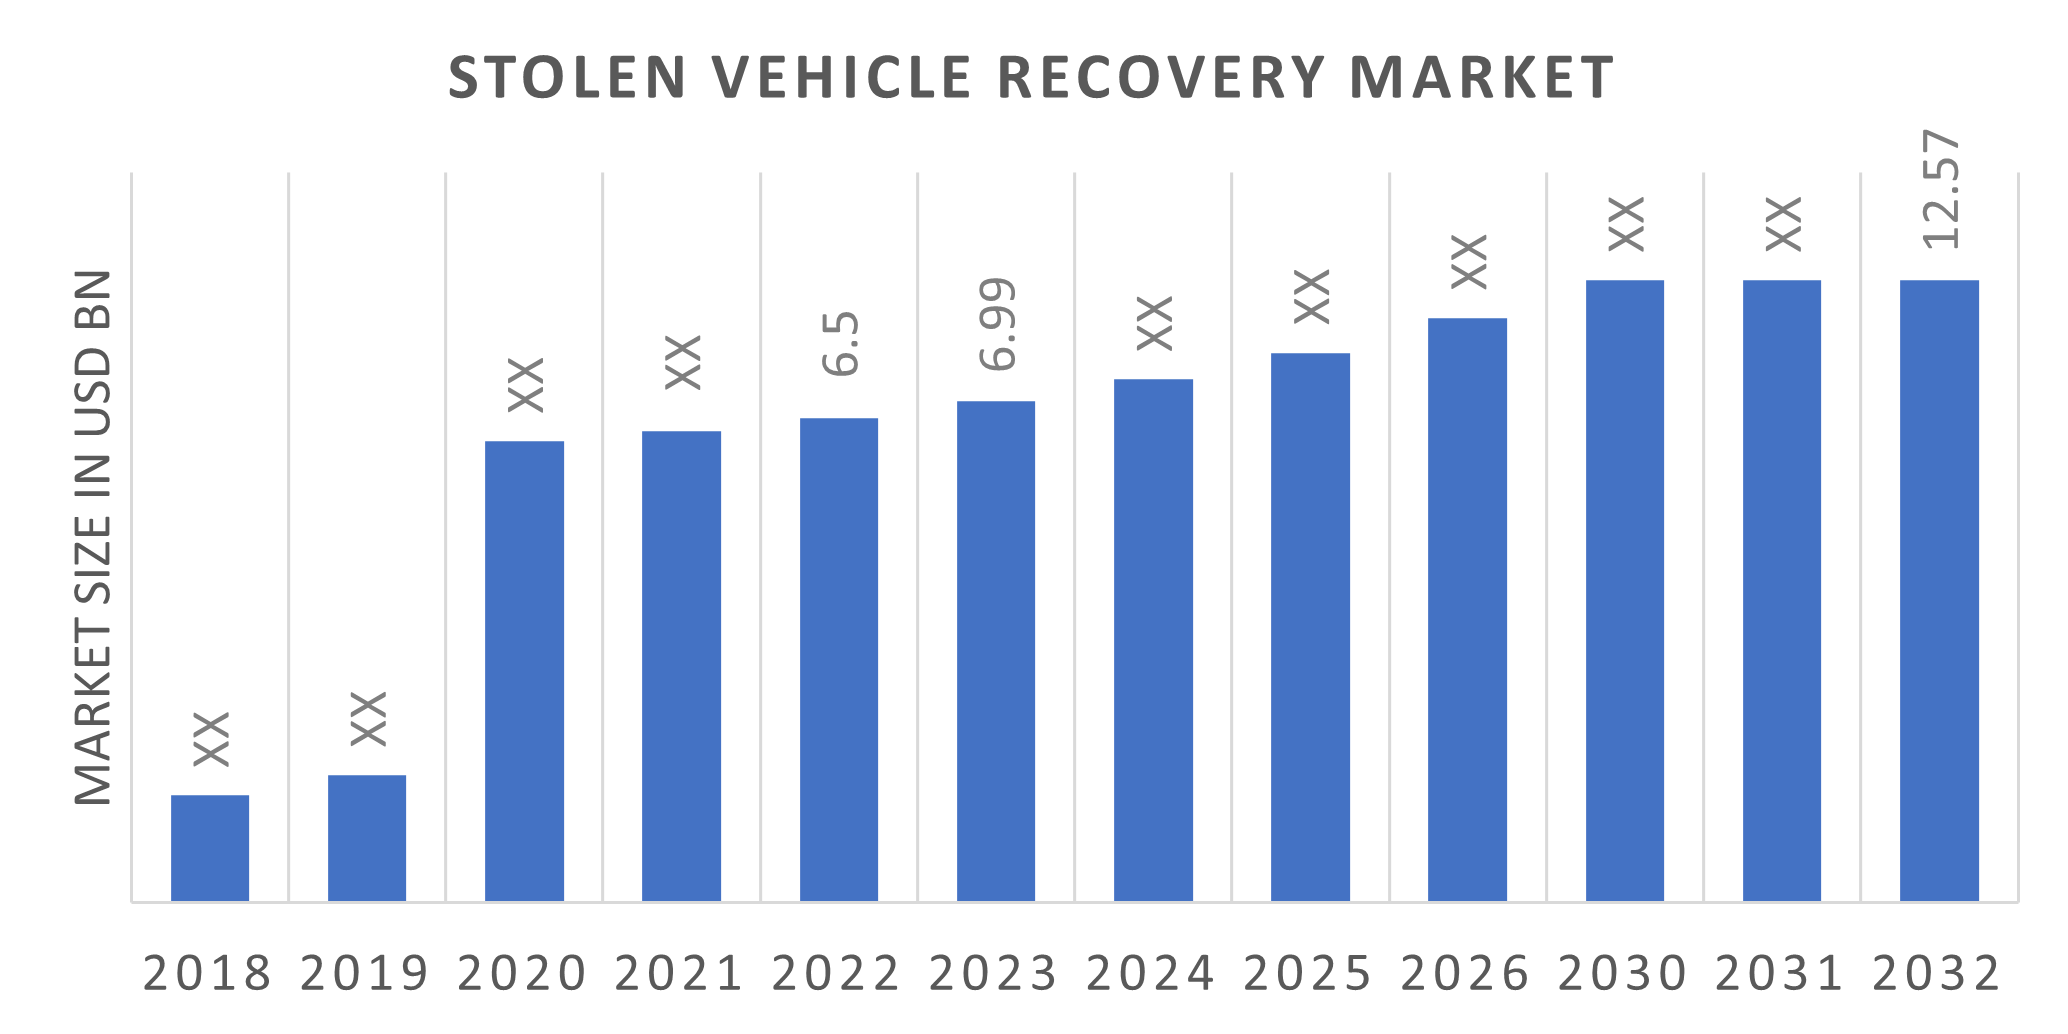 Stolen Vehicle Recovery Market Overview